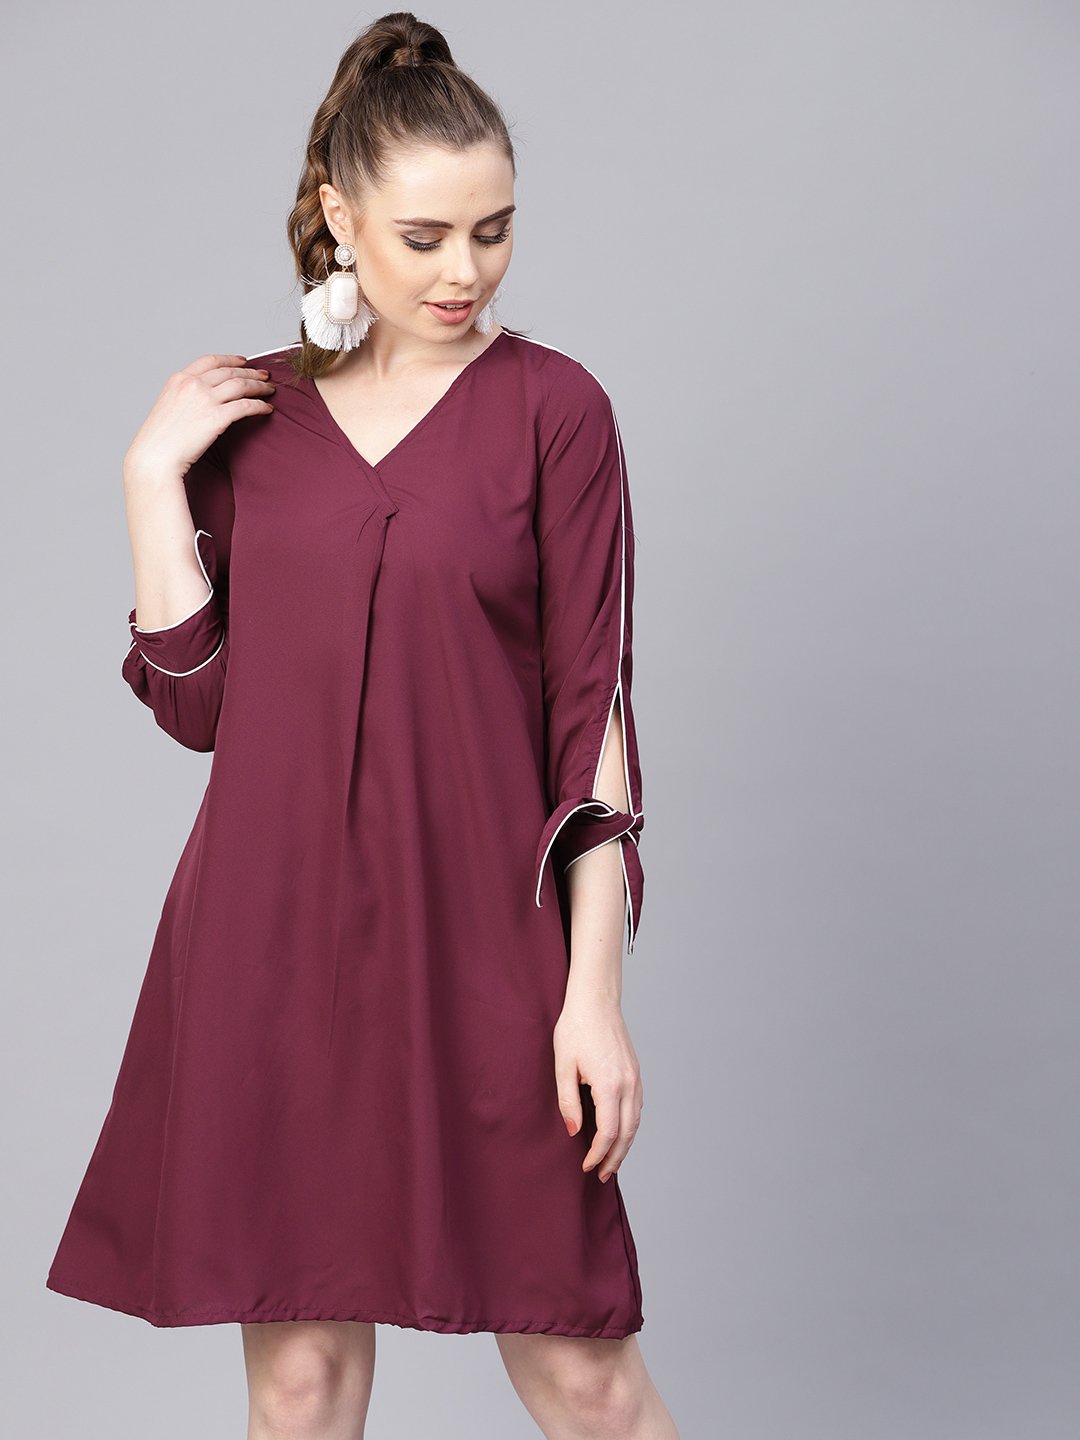 Women's Burgundy A-Line Dress With Knot Style Sleeves - Nayo Clothing